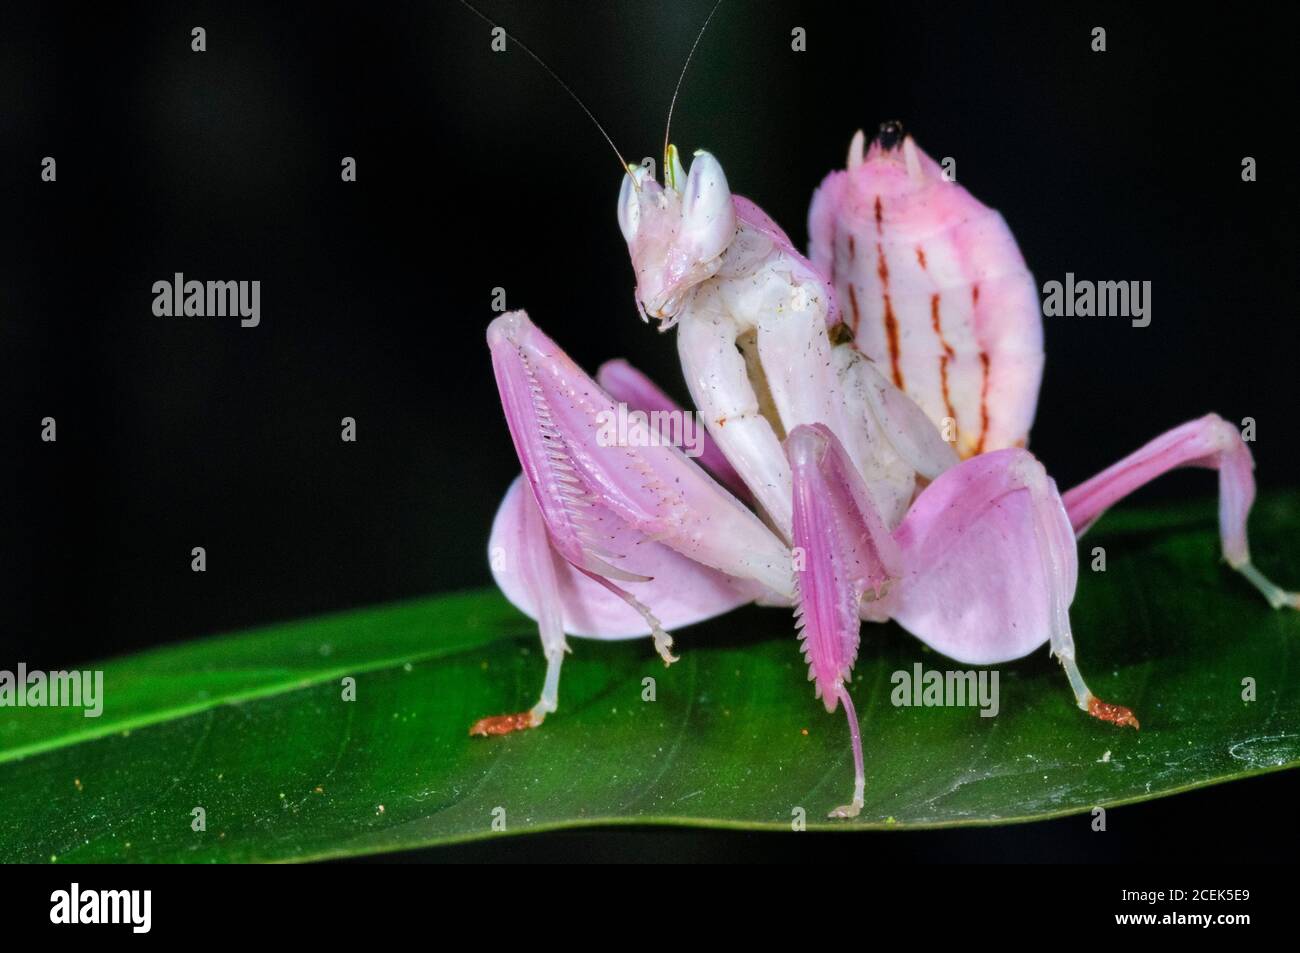 Pink Orchid Mantis Malaysian Orchid Mantis Hymenopus Coronatus Or Hymenopus Bicornis A Flower Mantis A Praying Mantis Which Mimics To Perfection Stock Photo Alamy,How To Get Sap Out Of Clothes Rubbing Alcohol